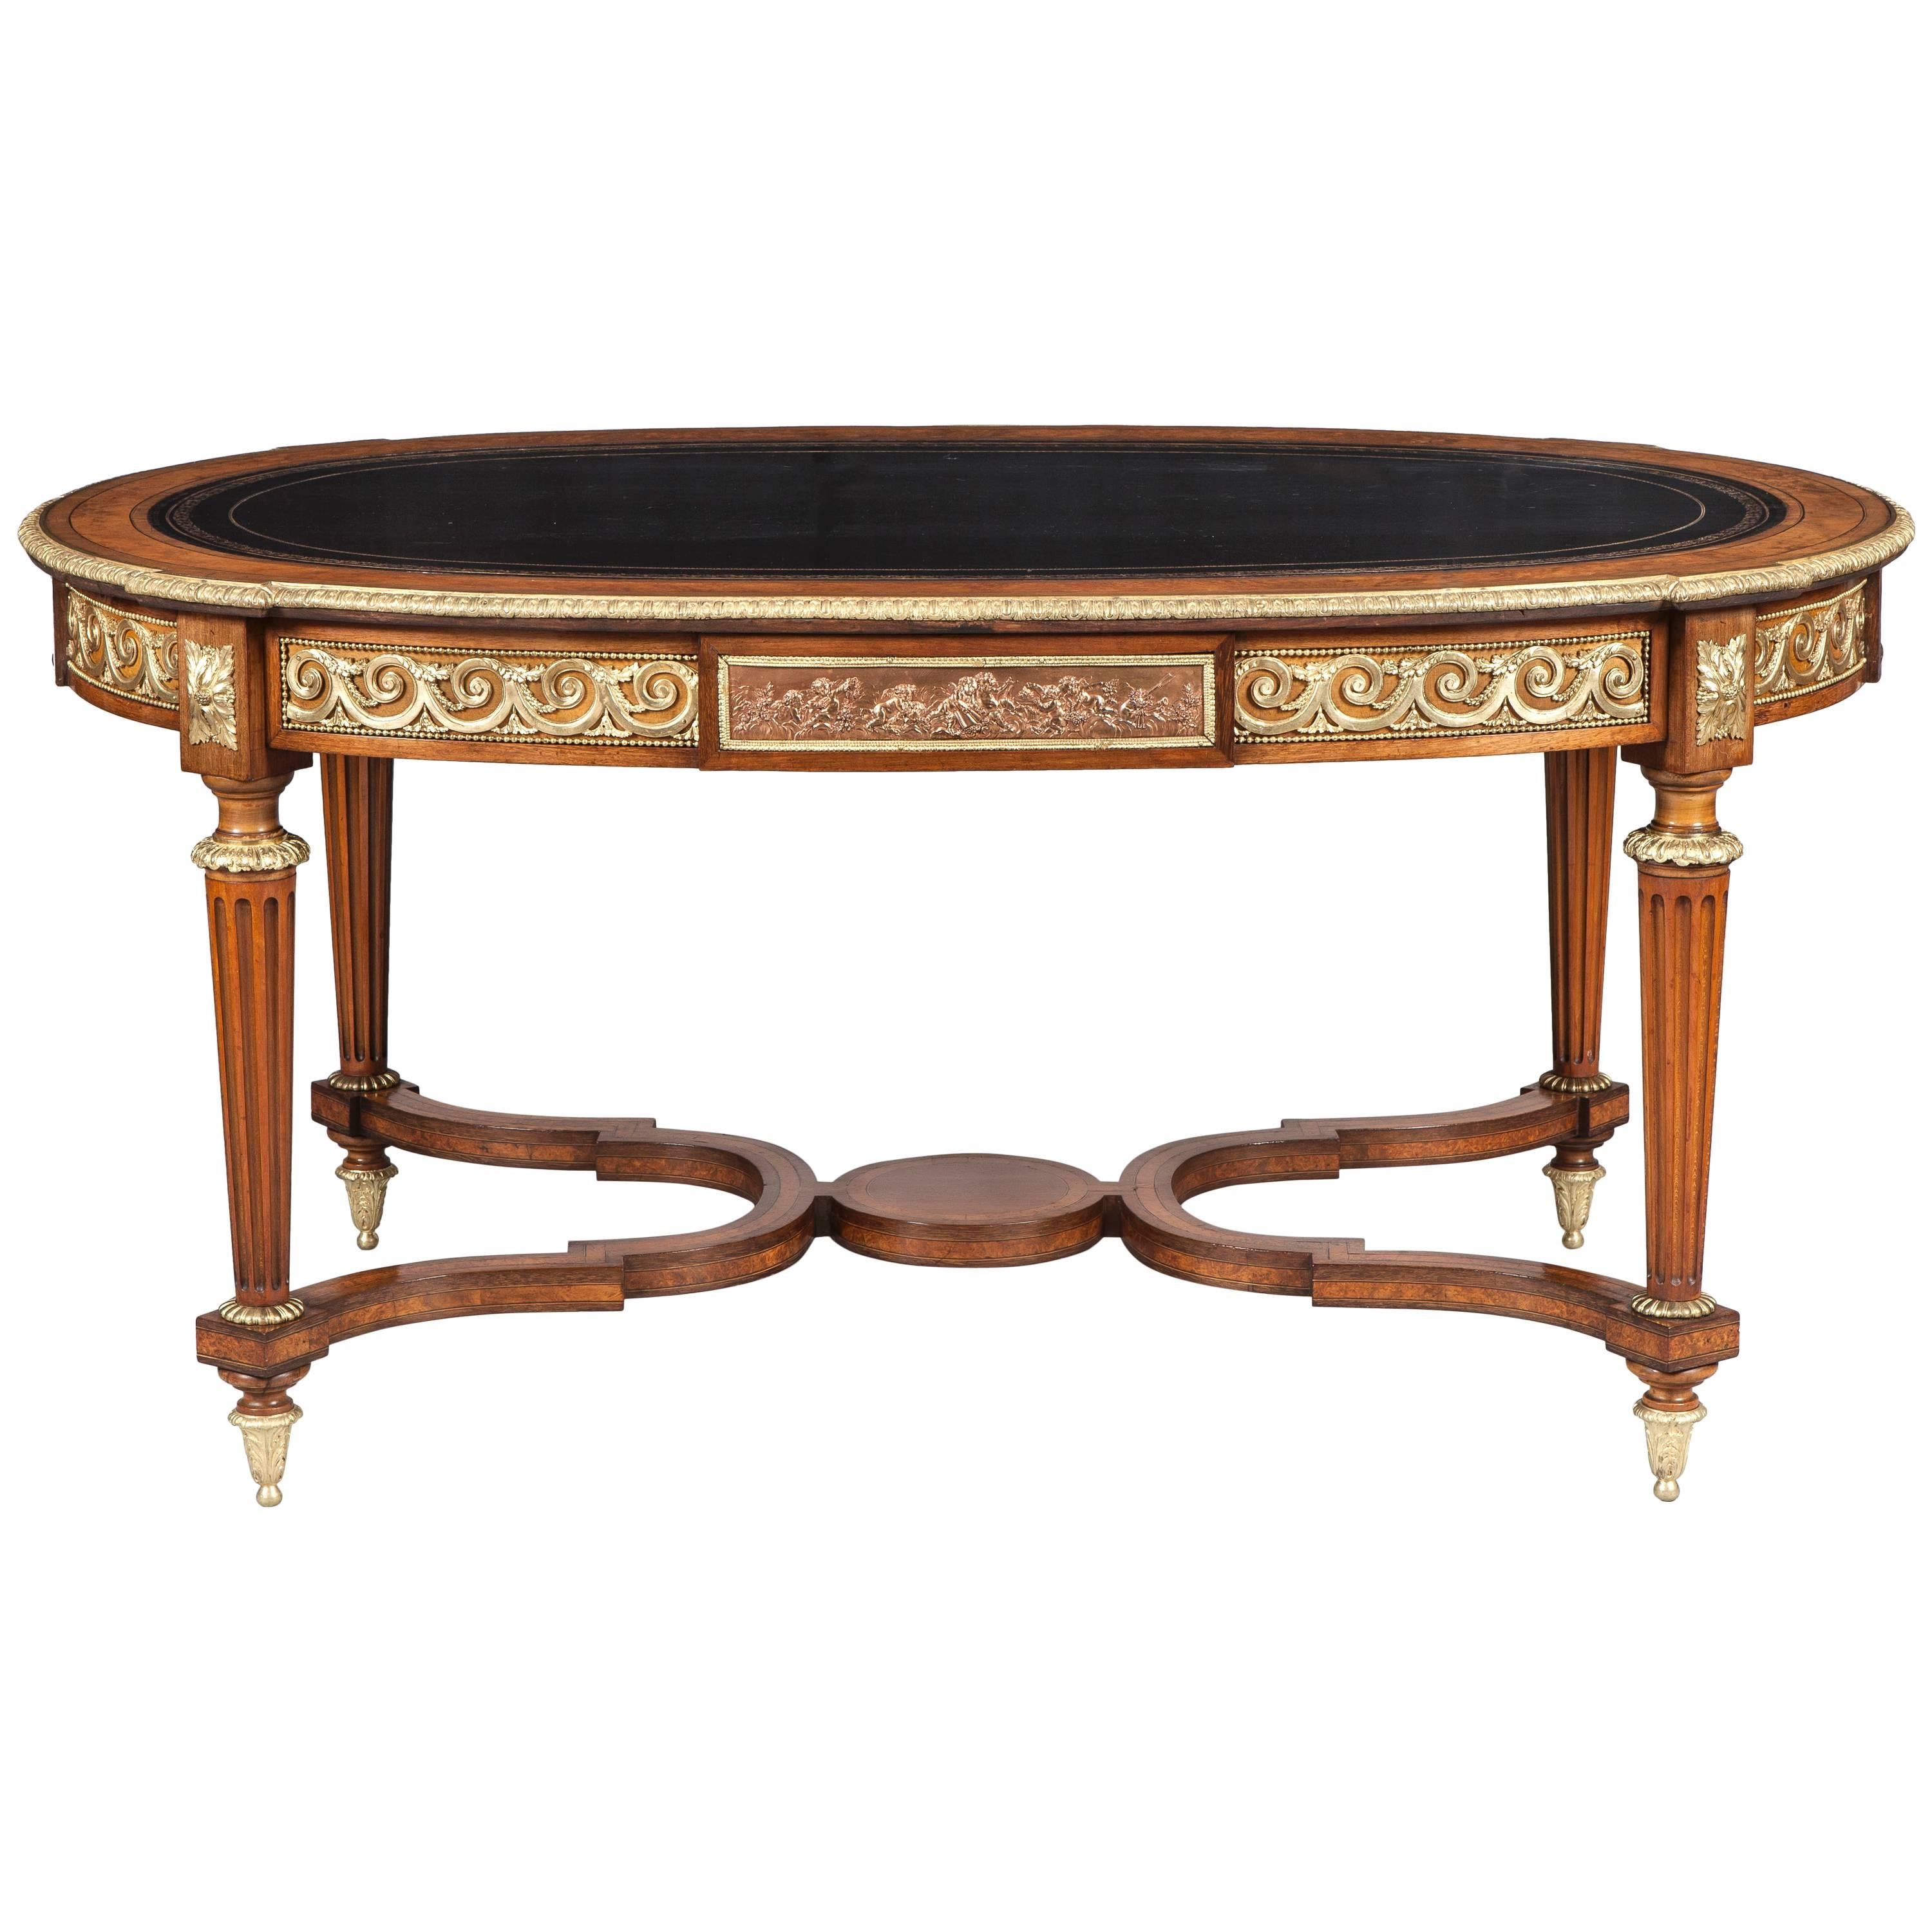 Decorative French Amboyna and Gilt Bronze Center Table